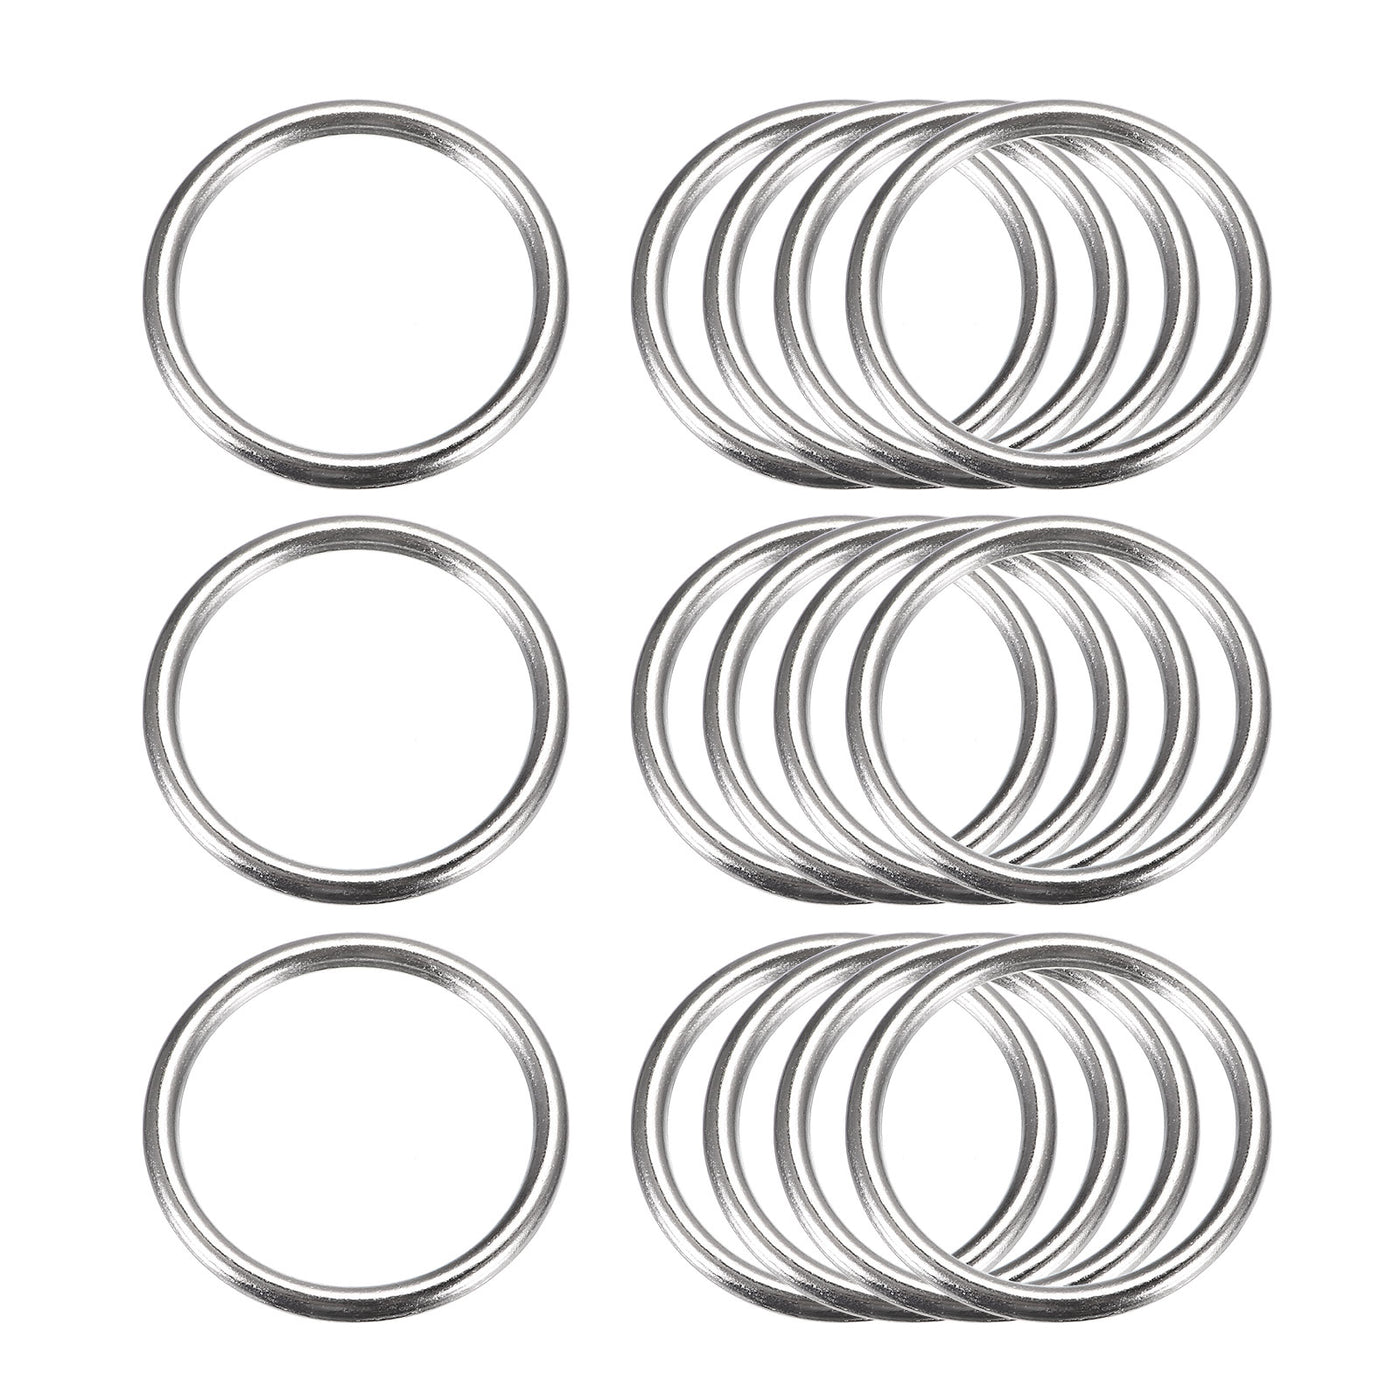 uxcell Uxcell Metal O Rings, 15pcs 30mm(1.18") ID 3mm Thick Welded O-Ringe, Silver Tone